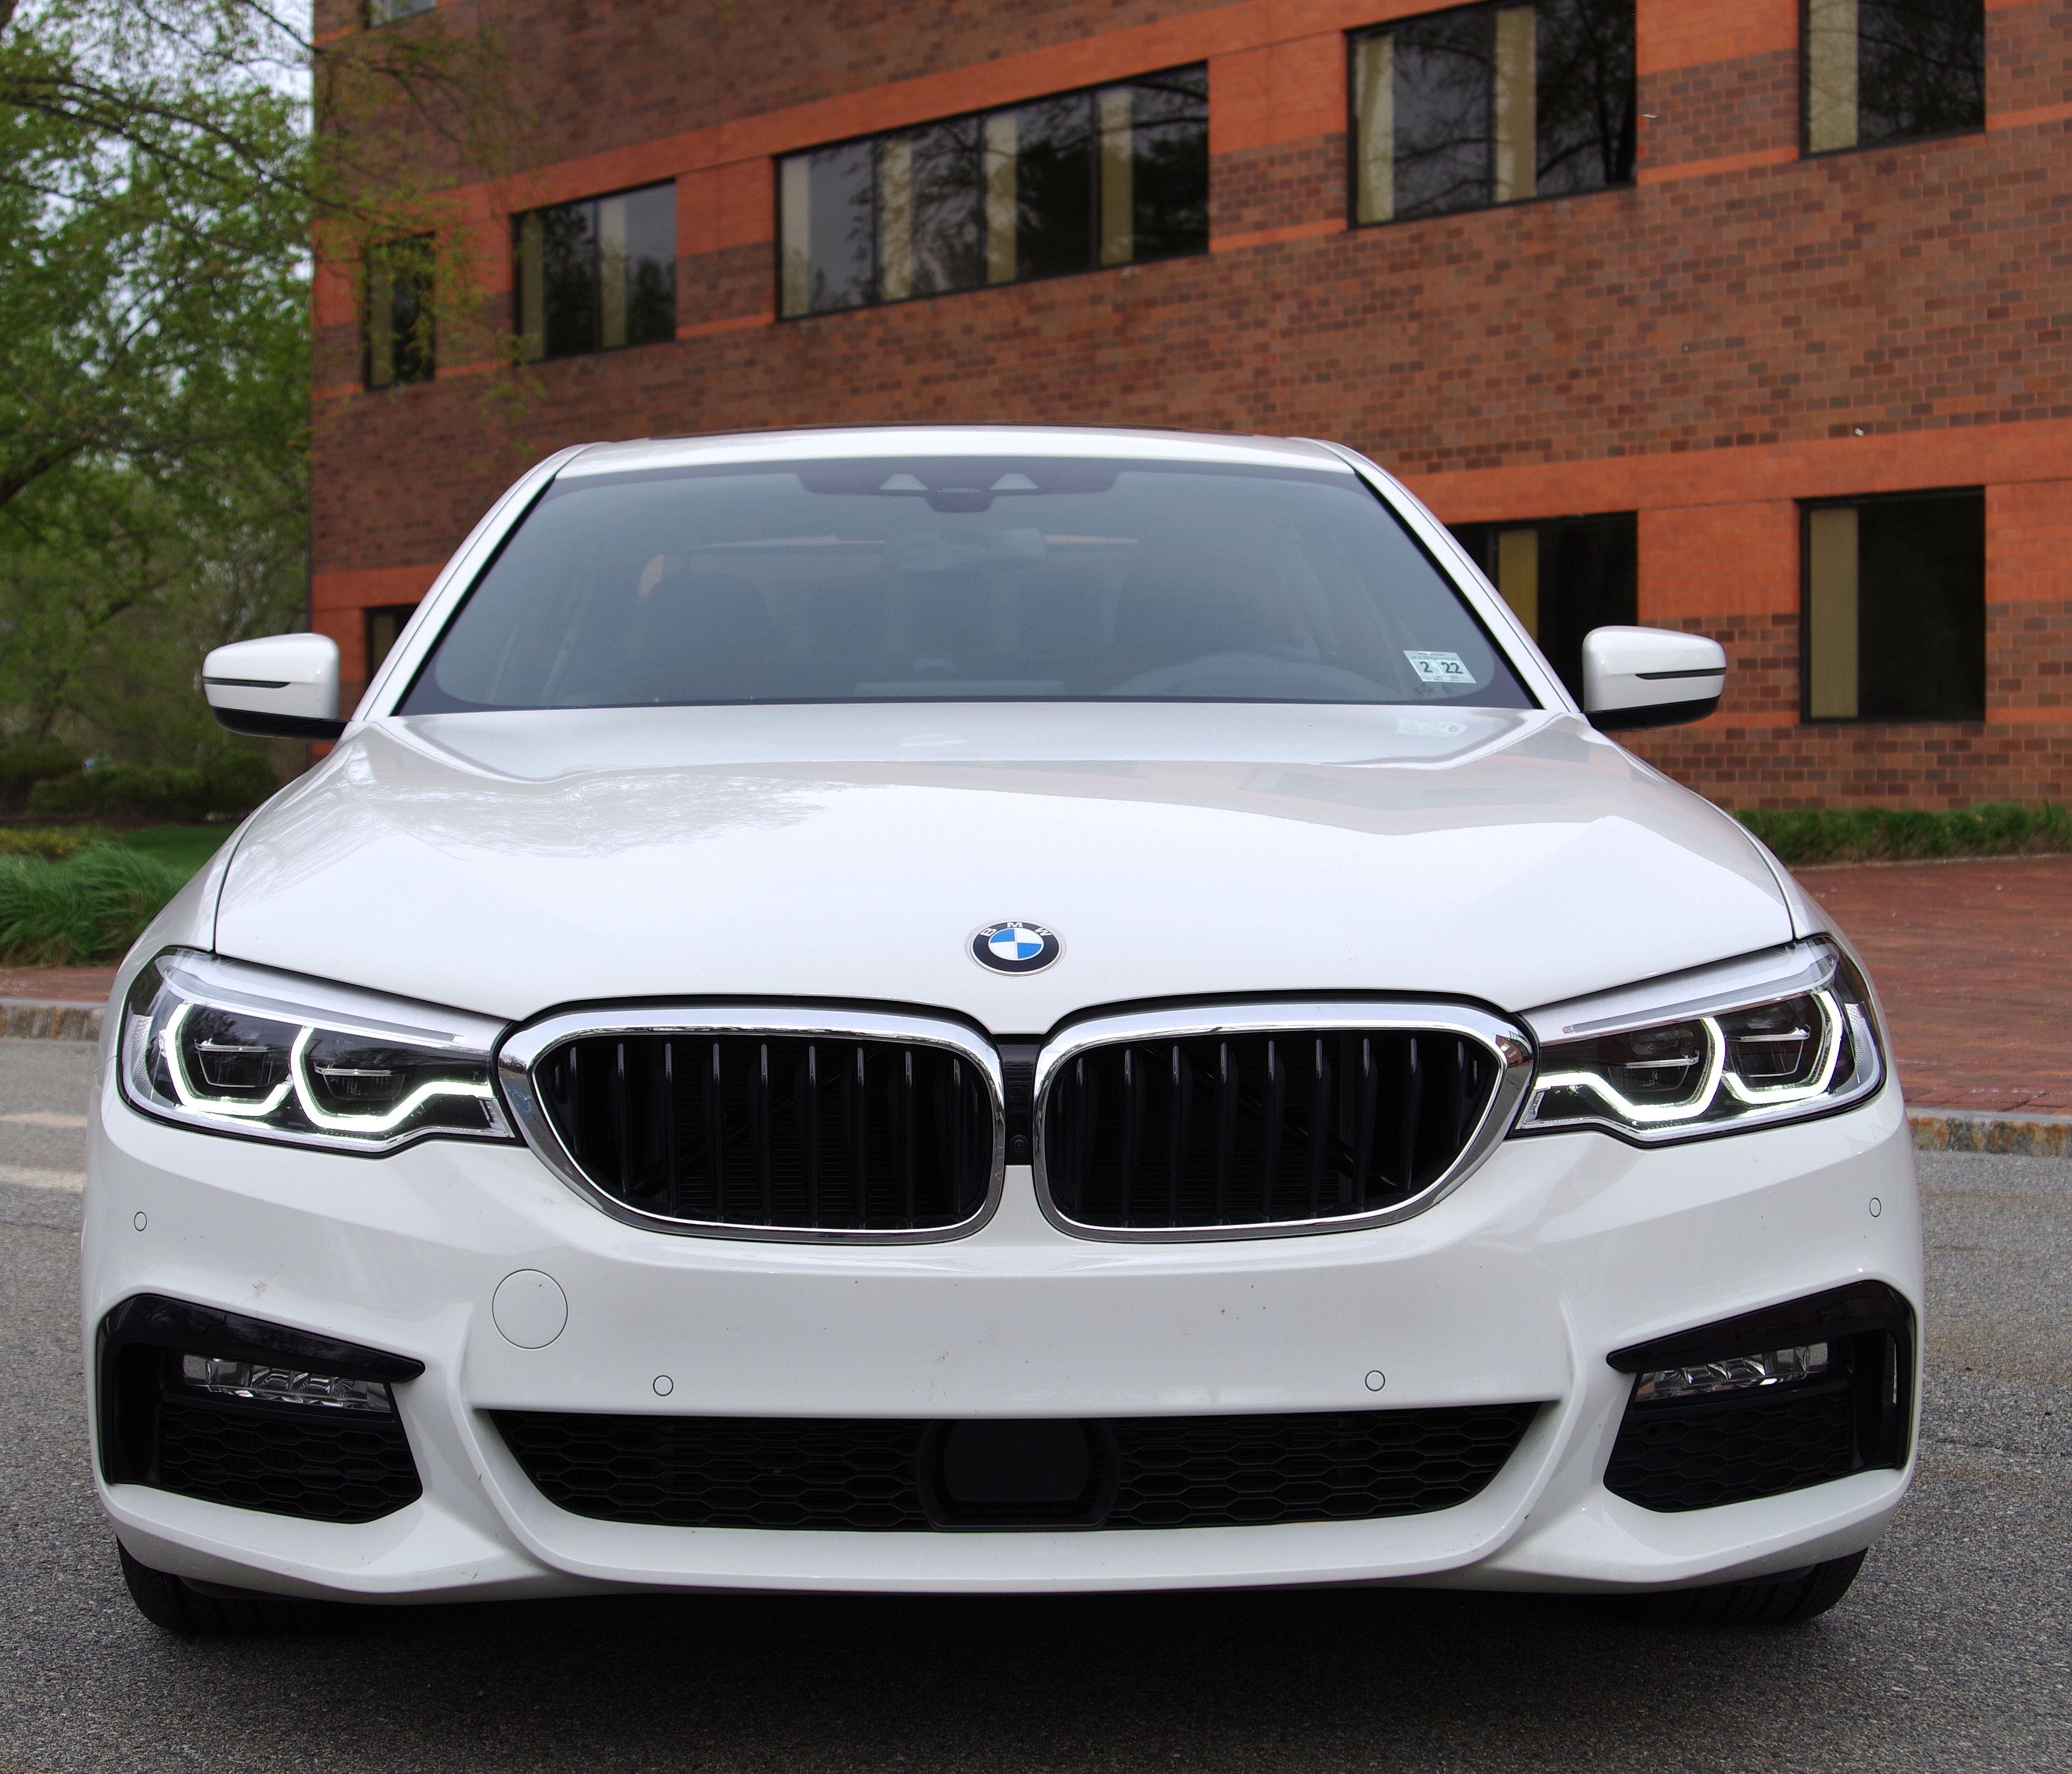 From the front, the 5 Series remains a familiar face.